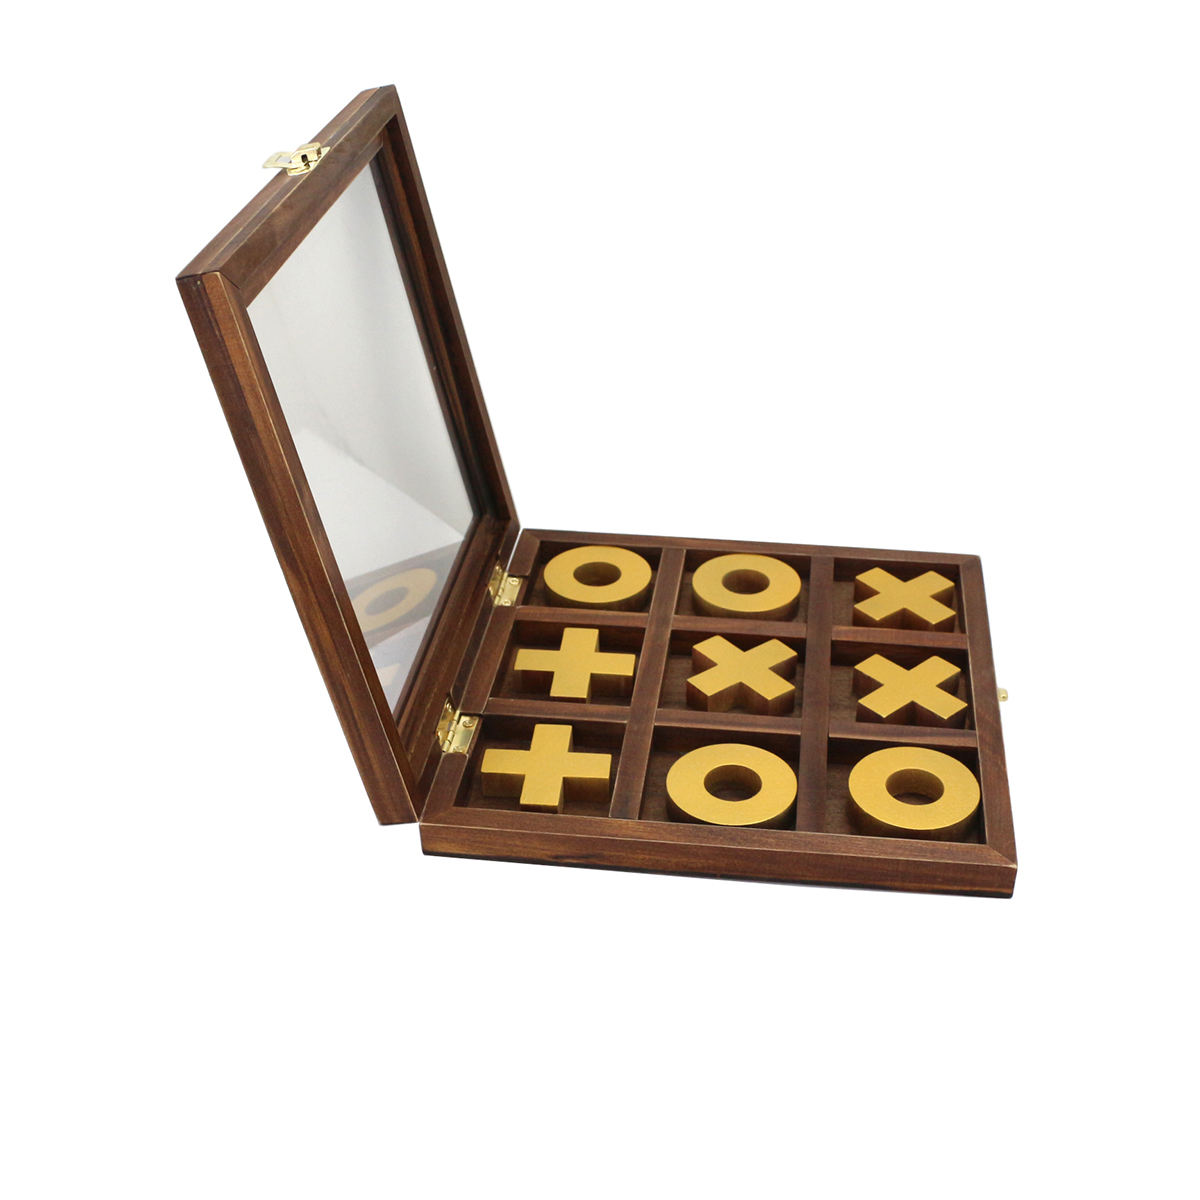 Golden Xs and Os Foldable Travel Set Custom Wooden Board Games XO game Tic Tac Toe Game Set